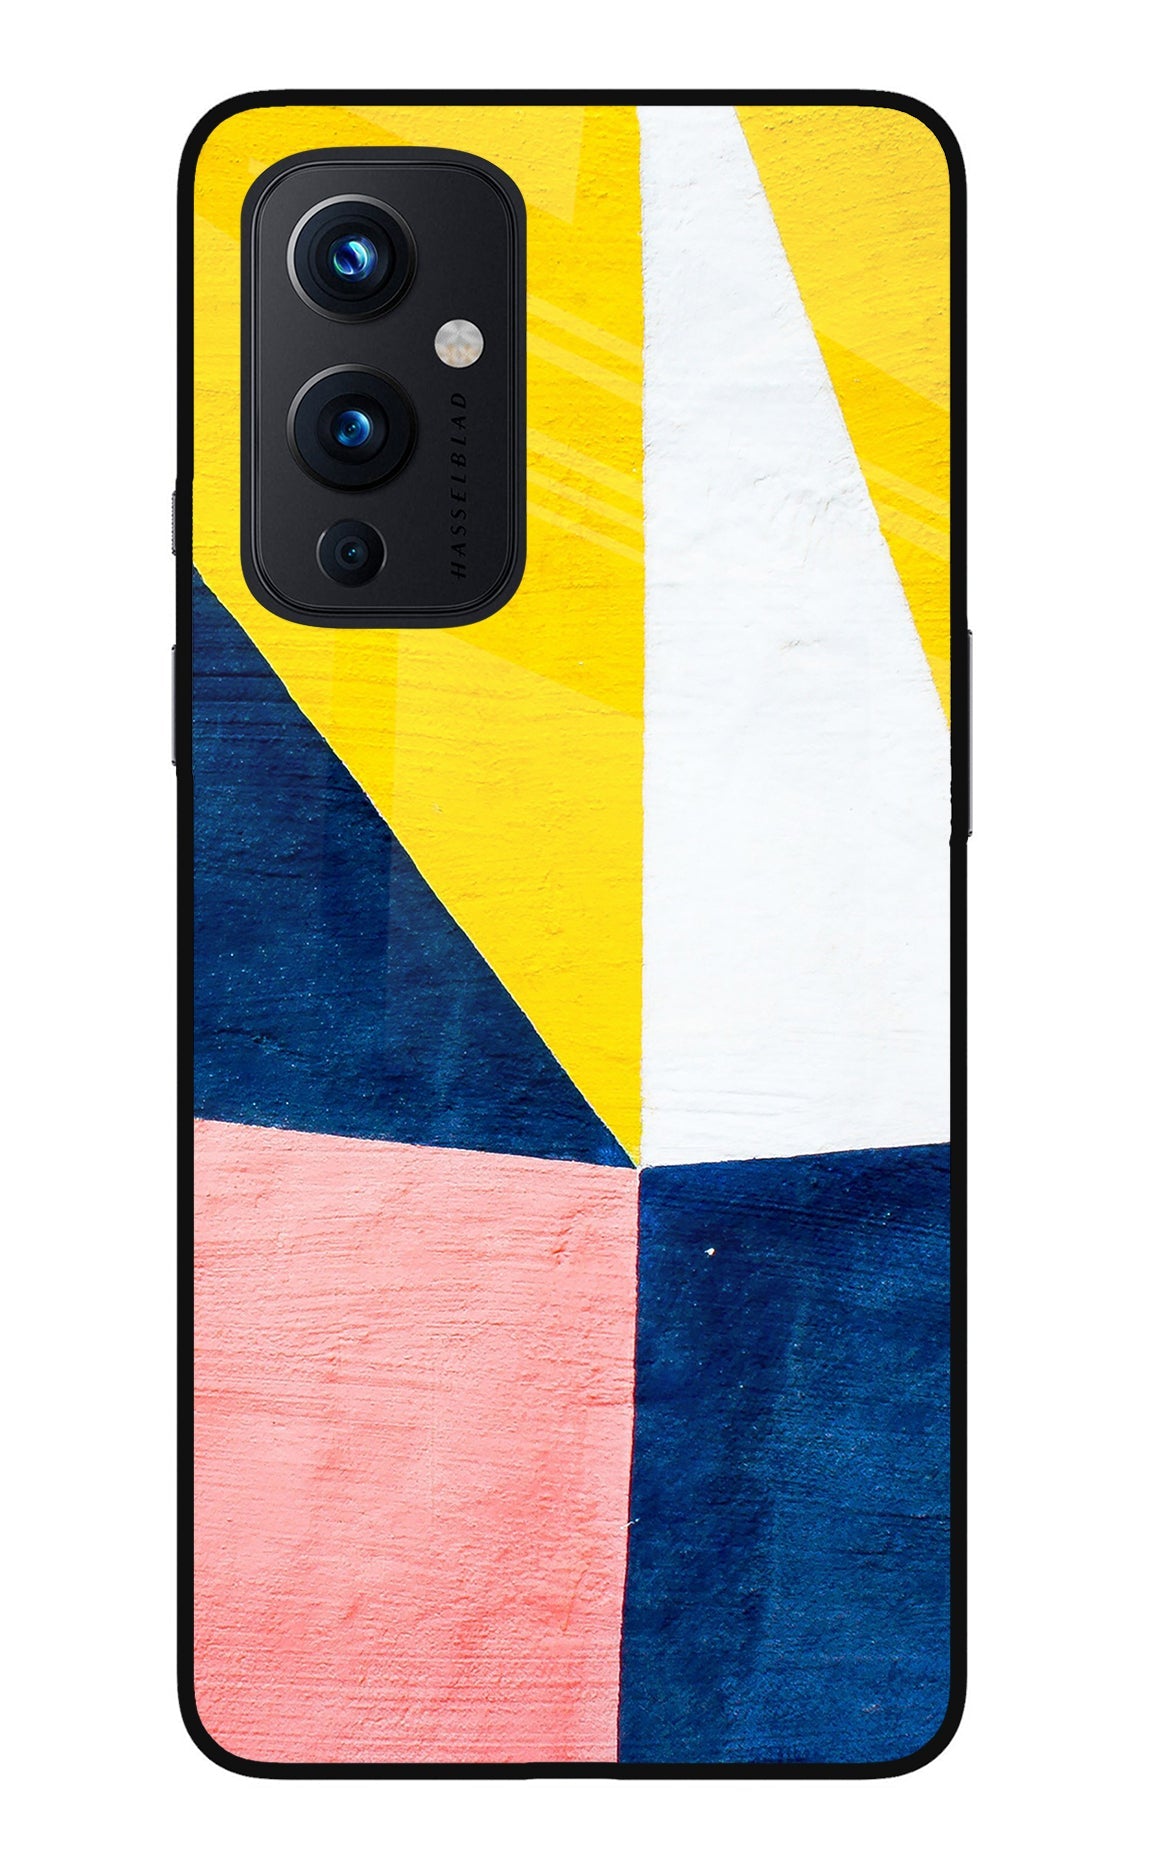 Colourful Art Oneplus 9 Glass Case